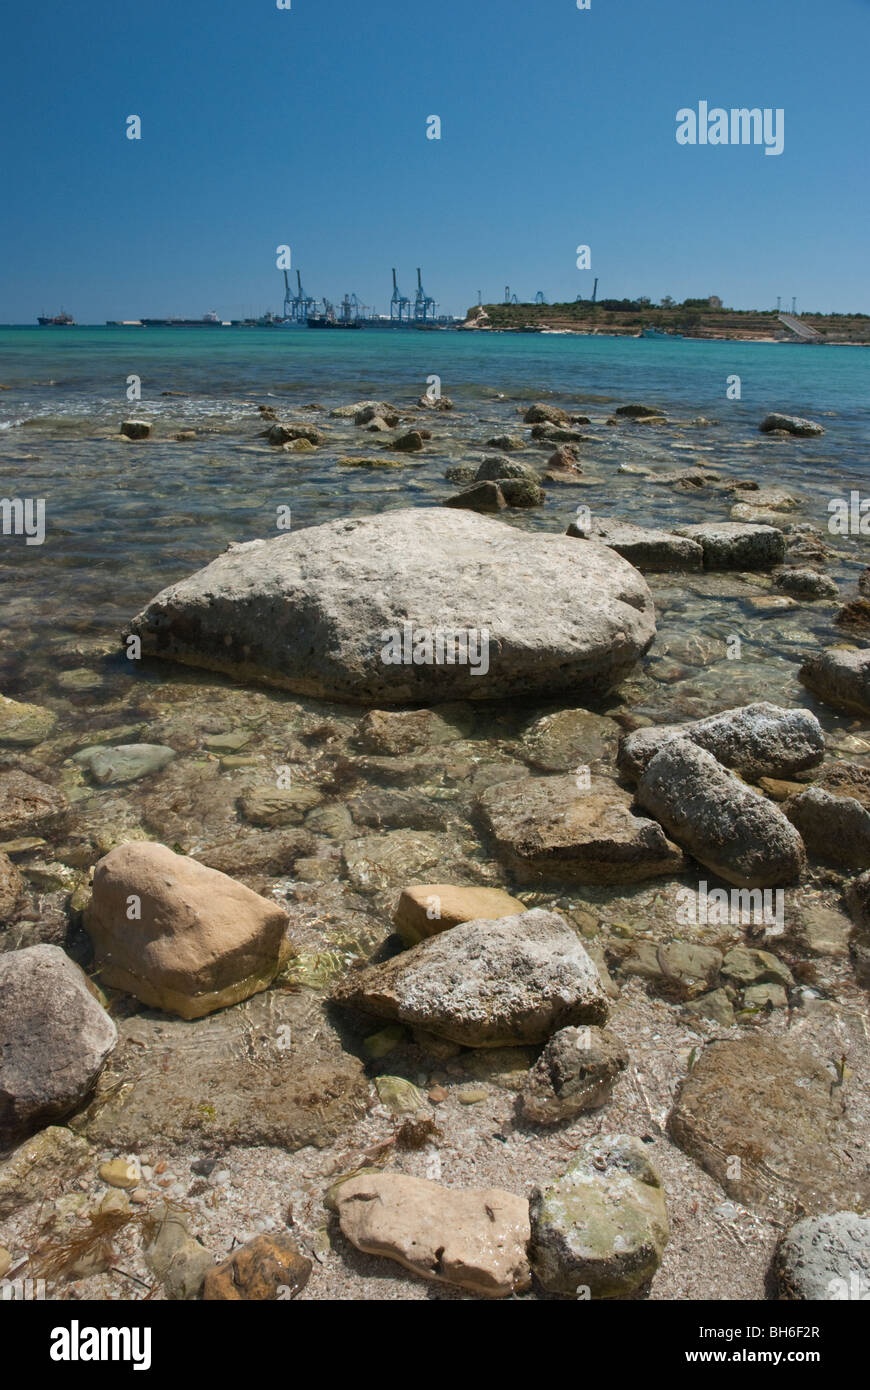 View from Maraslokk of the Mediteranean sea with an oil terminal and cranes on the horizon at Birżebbuġa. Stock Photo